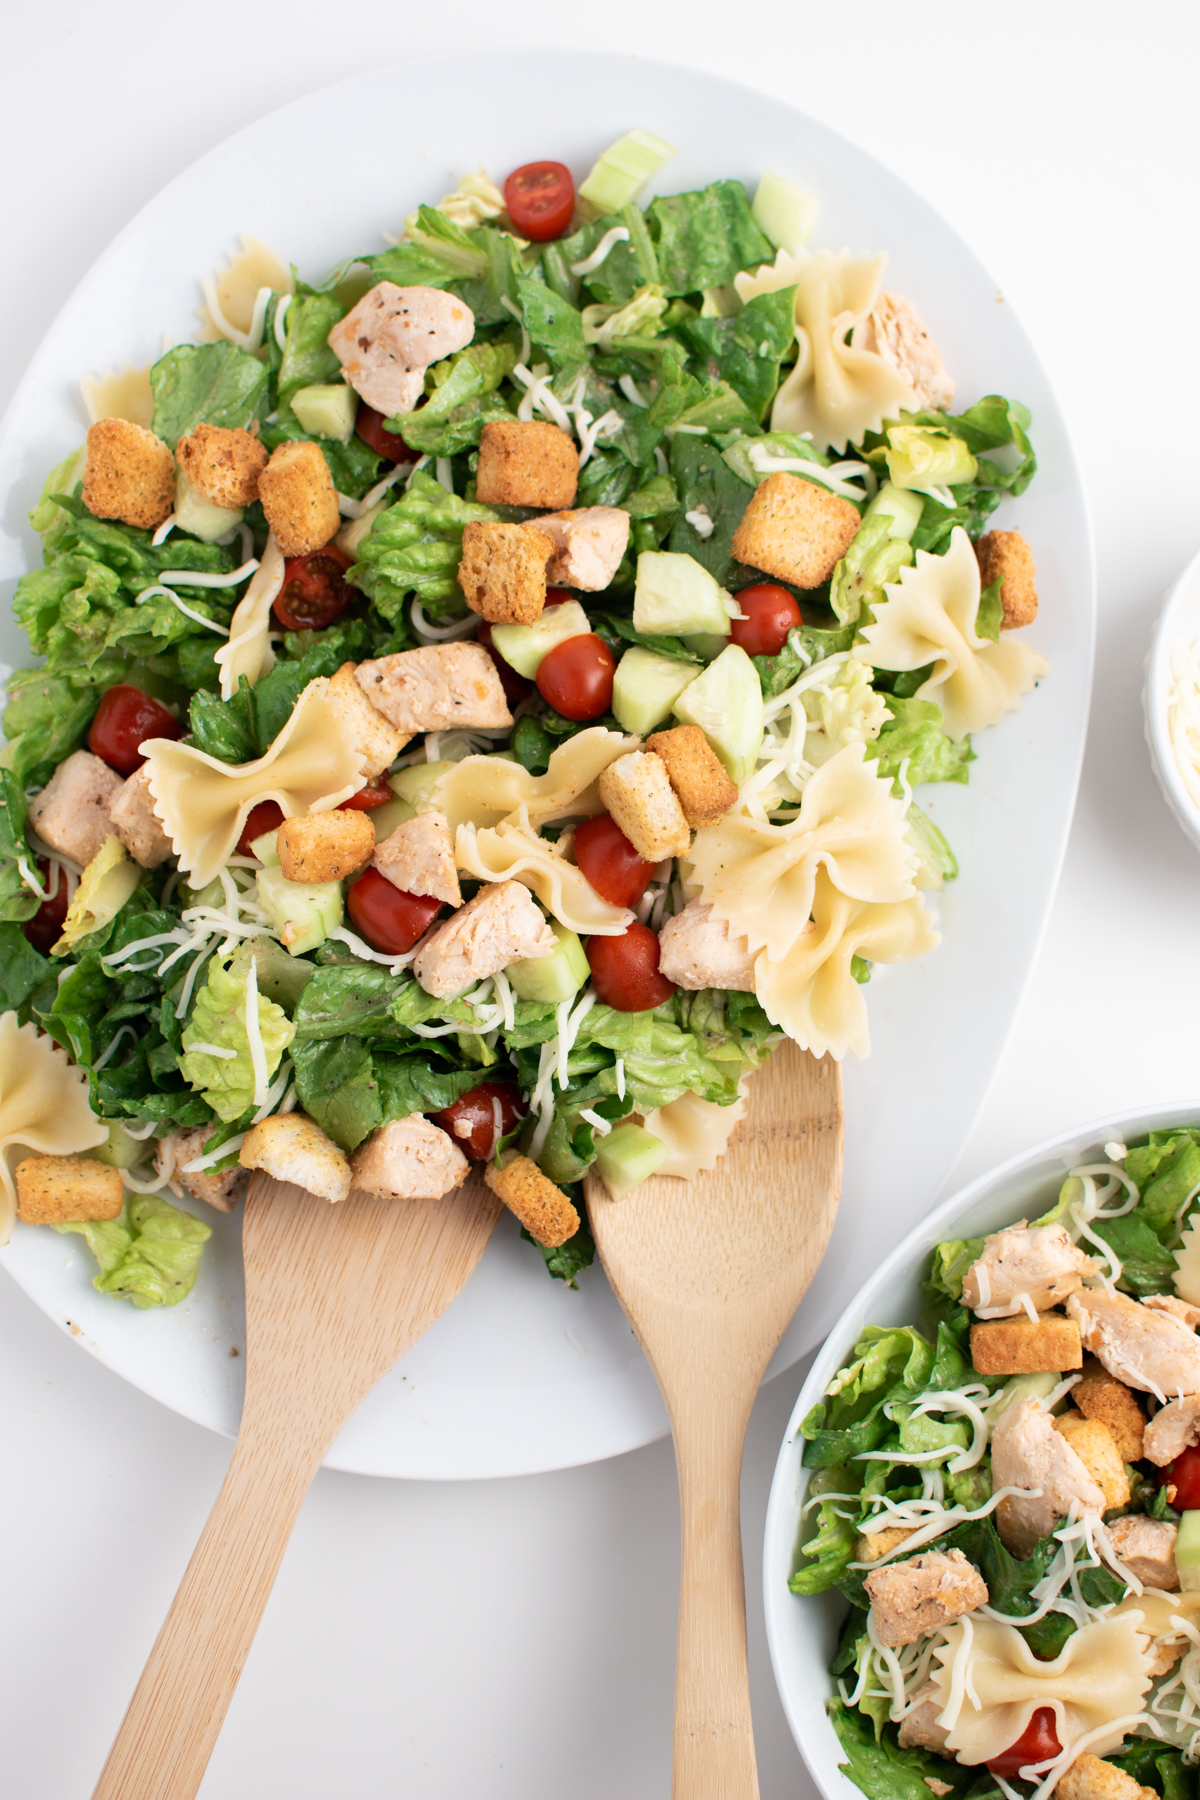 Chicken Caesar salad with pasta, croutons, cheese and tomatoes on white platter.